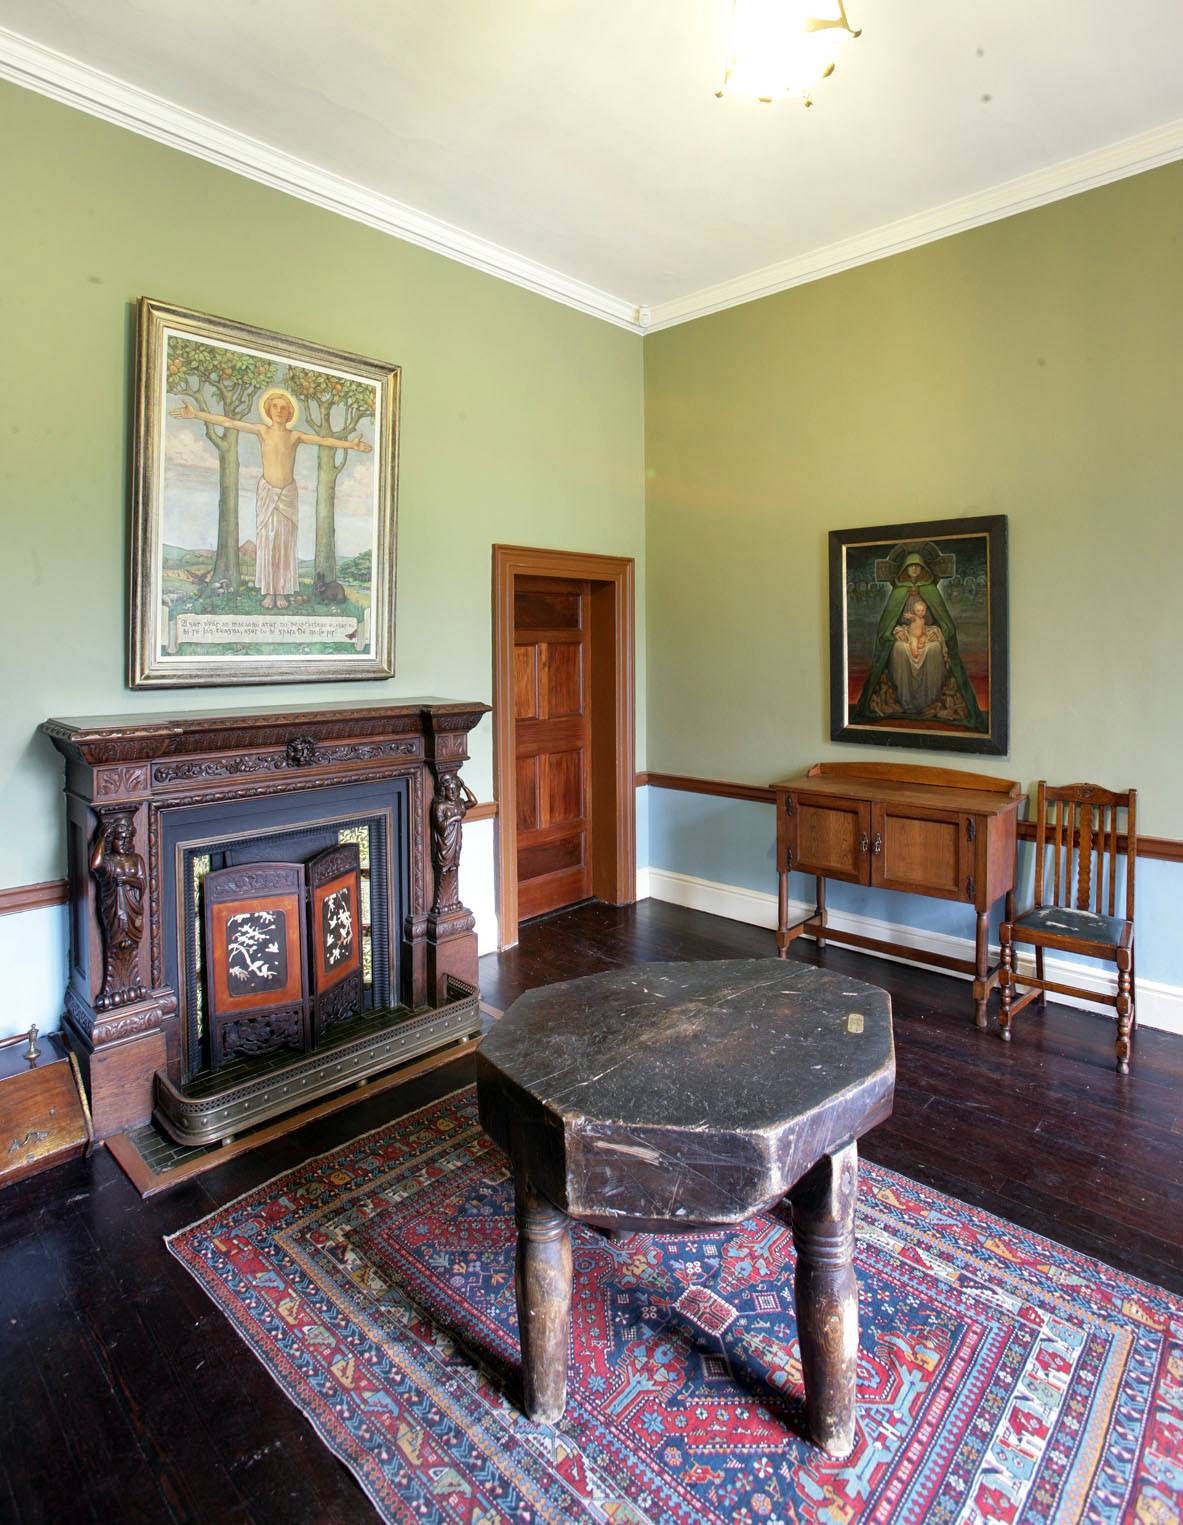 The entrance hall. ©National Monuments Service Dept of Arts, Heritage and the Gaeltacht. 